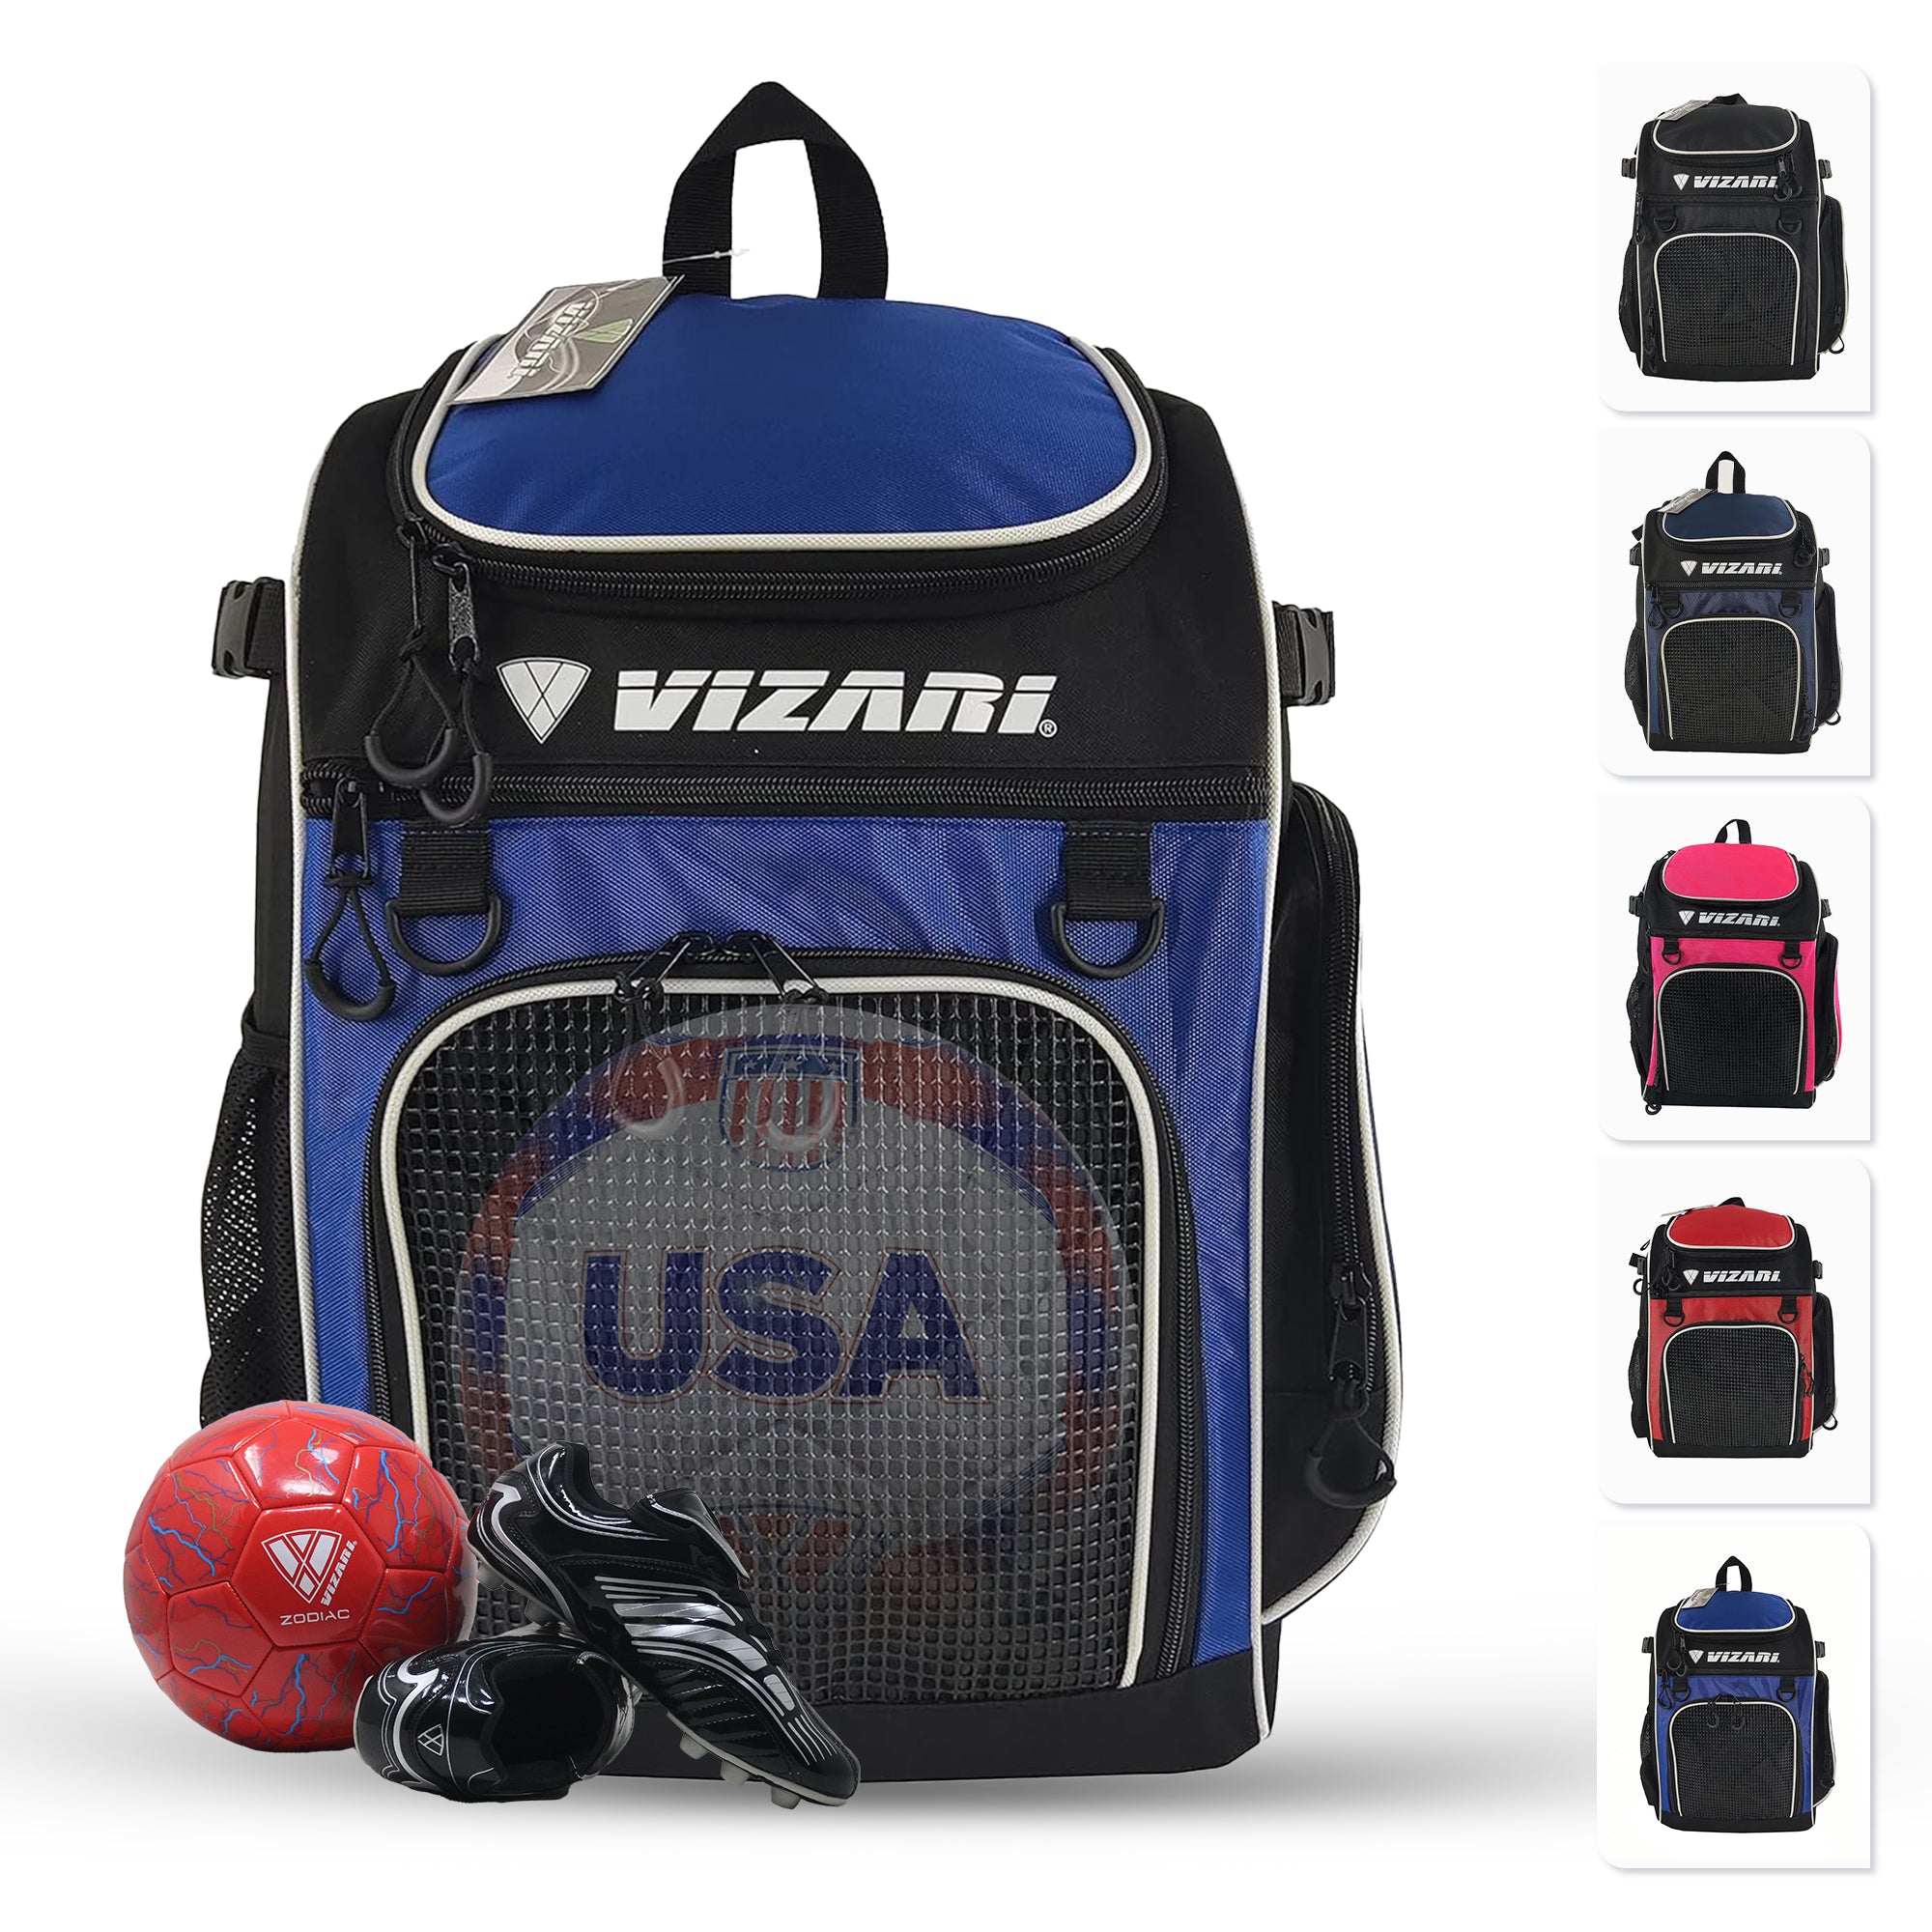 Cambria Soccer Backpack - Royal Blue/White